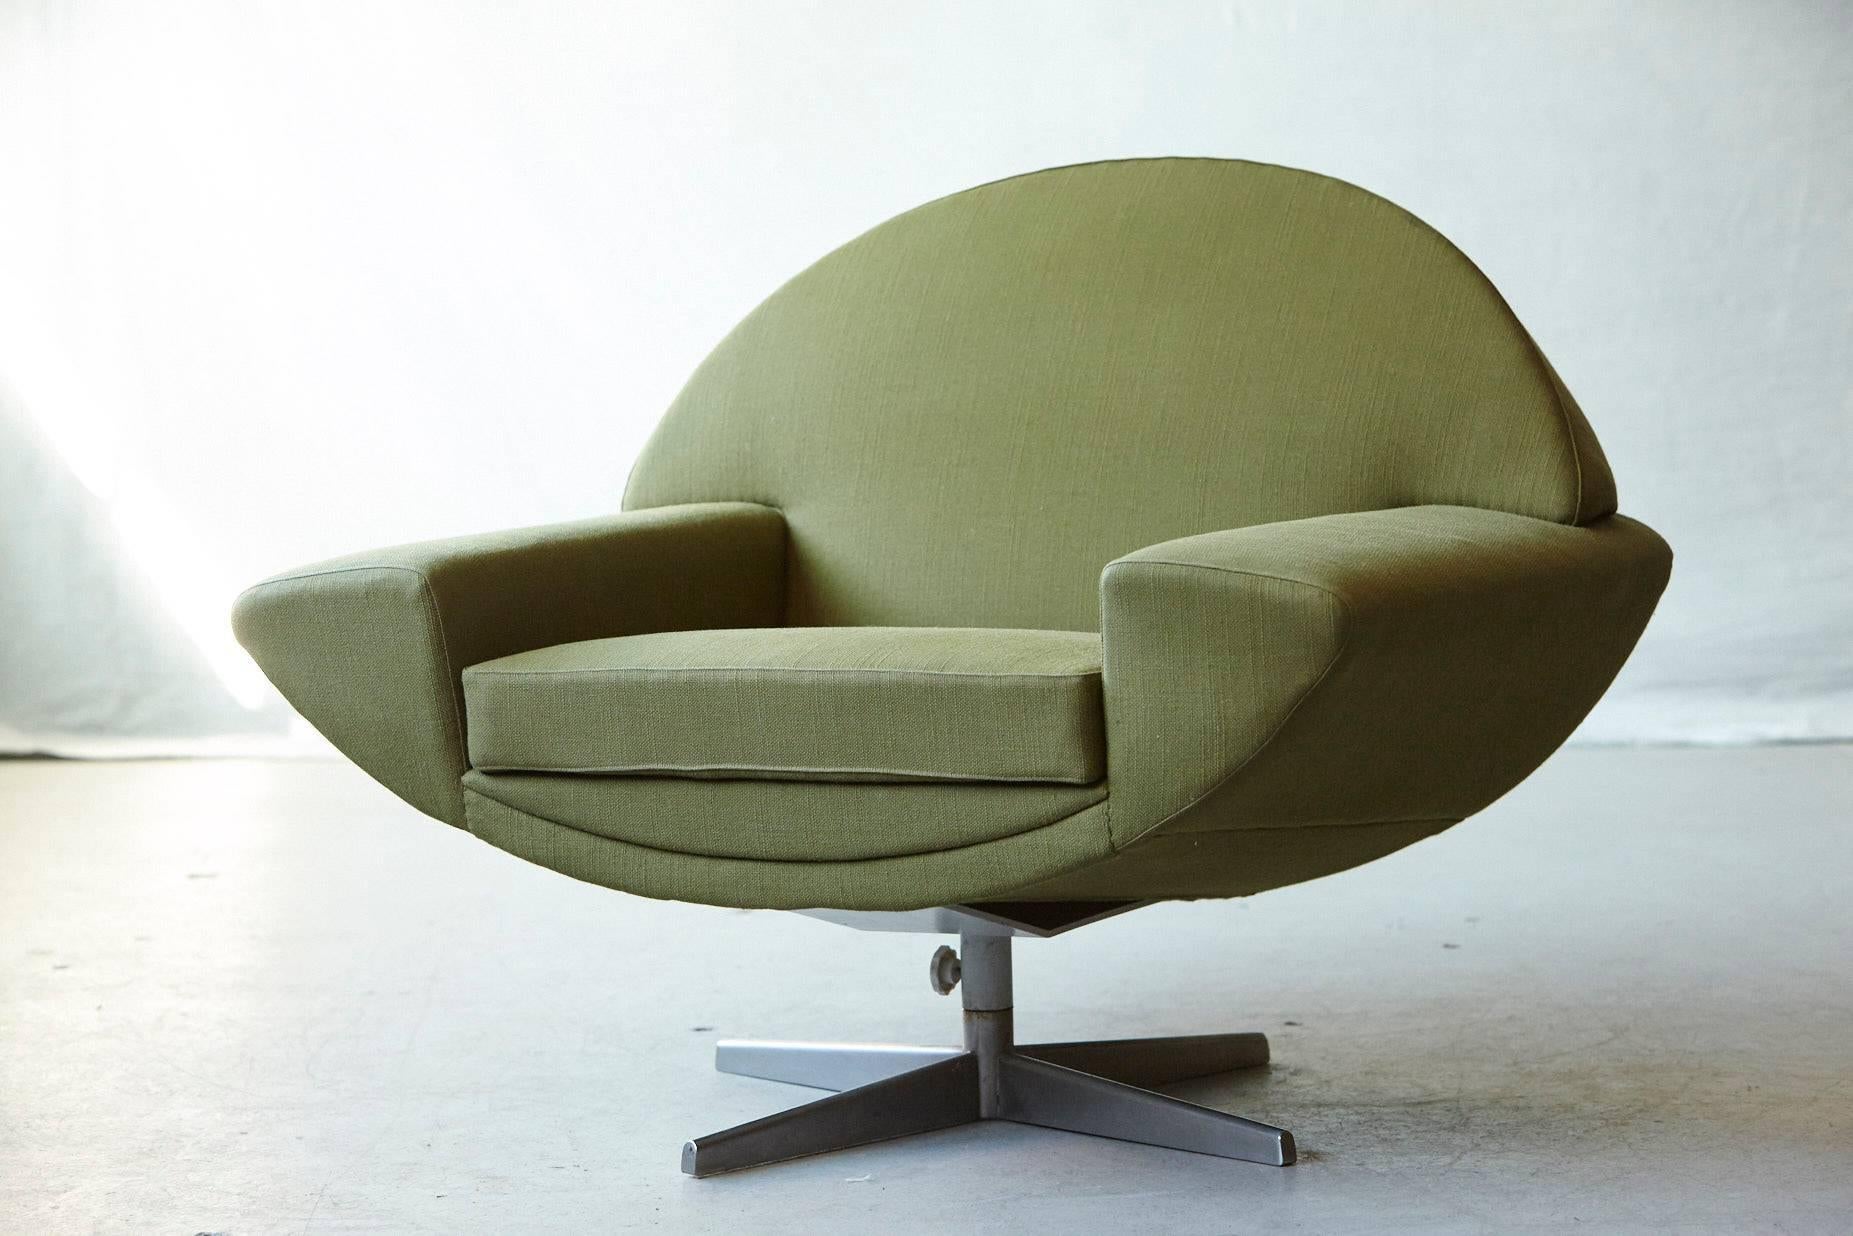 The 'Capri' chair was designed by Johannes Andersen for Trensums, Denmark, 1960s.
Bolt lines, a prominently arched crest, and a barrel bottom give this lounge chair a sleek futuristic impression. The chair has a swiveling four-star steel base and is